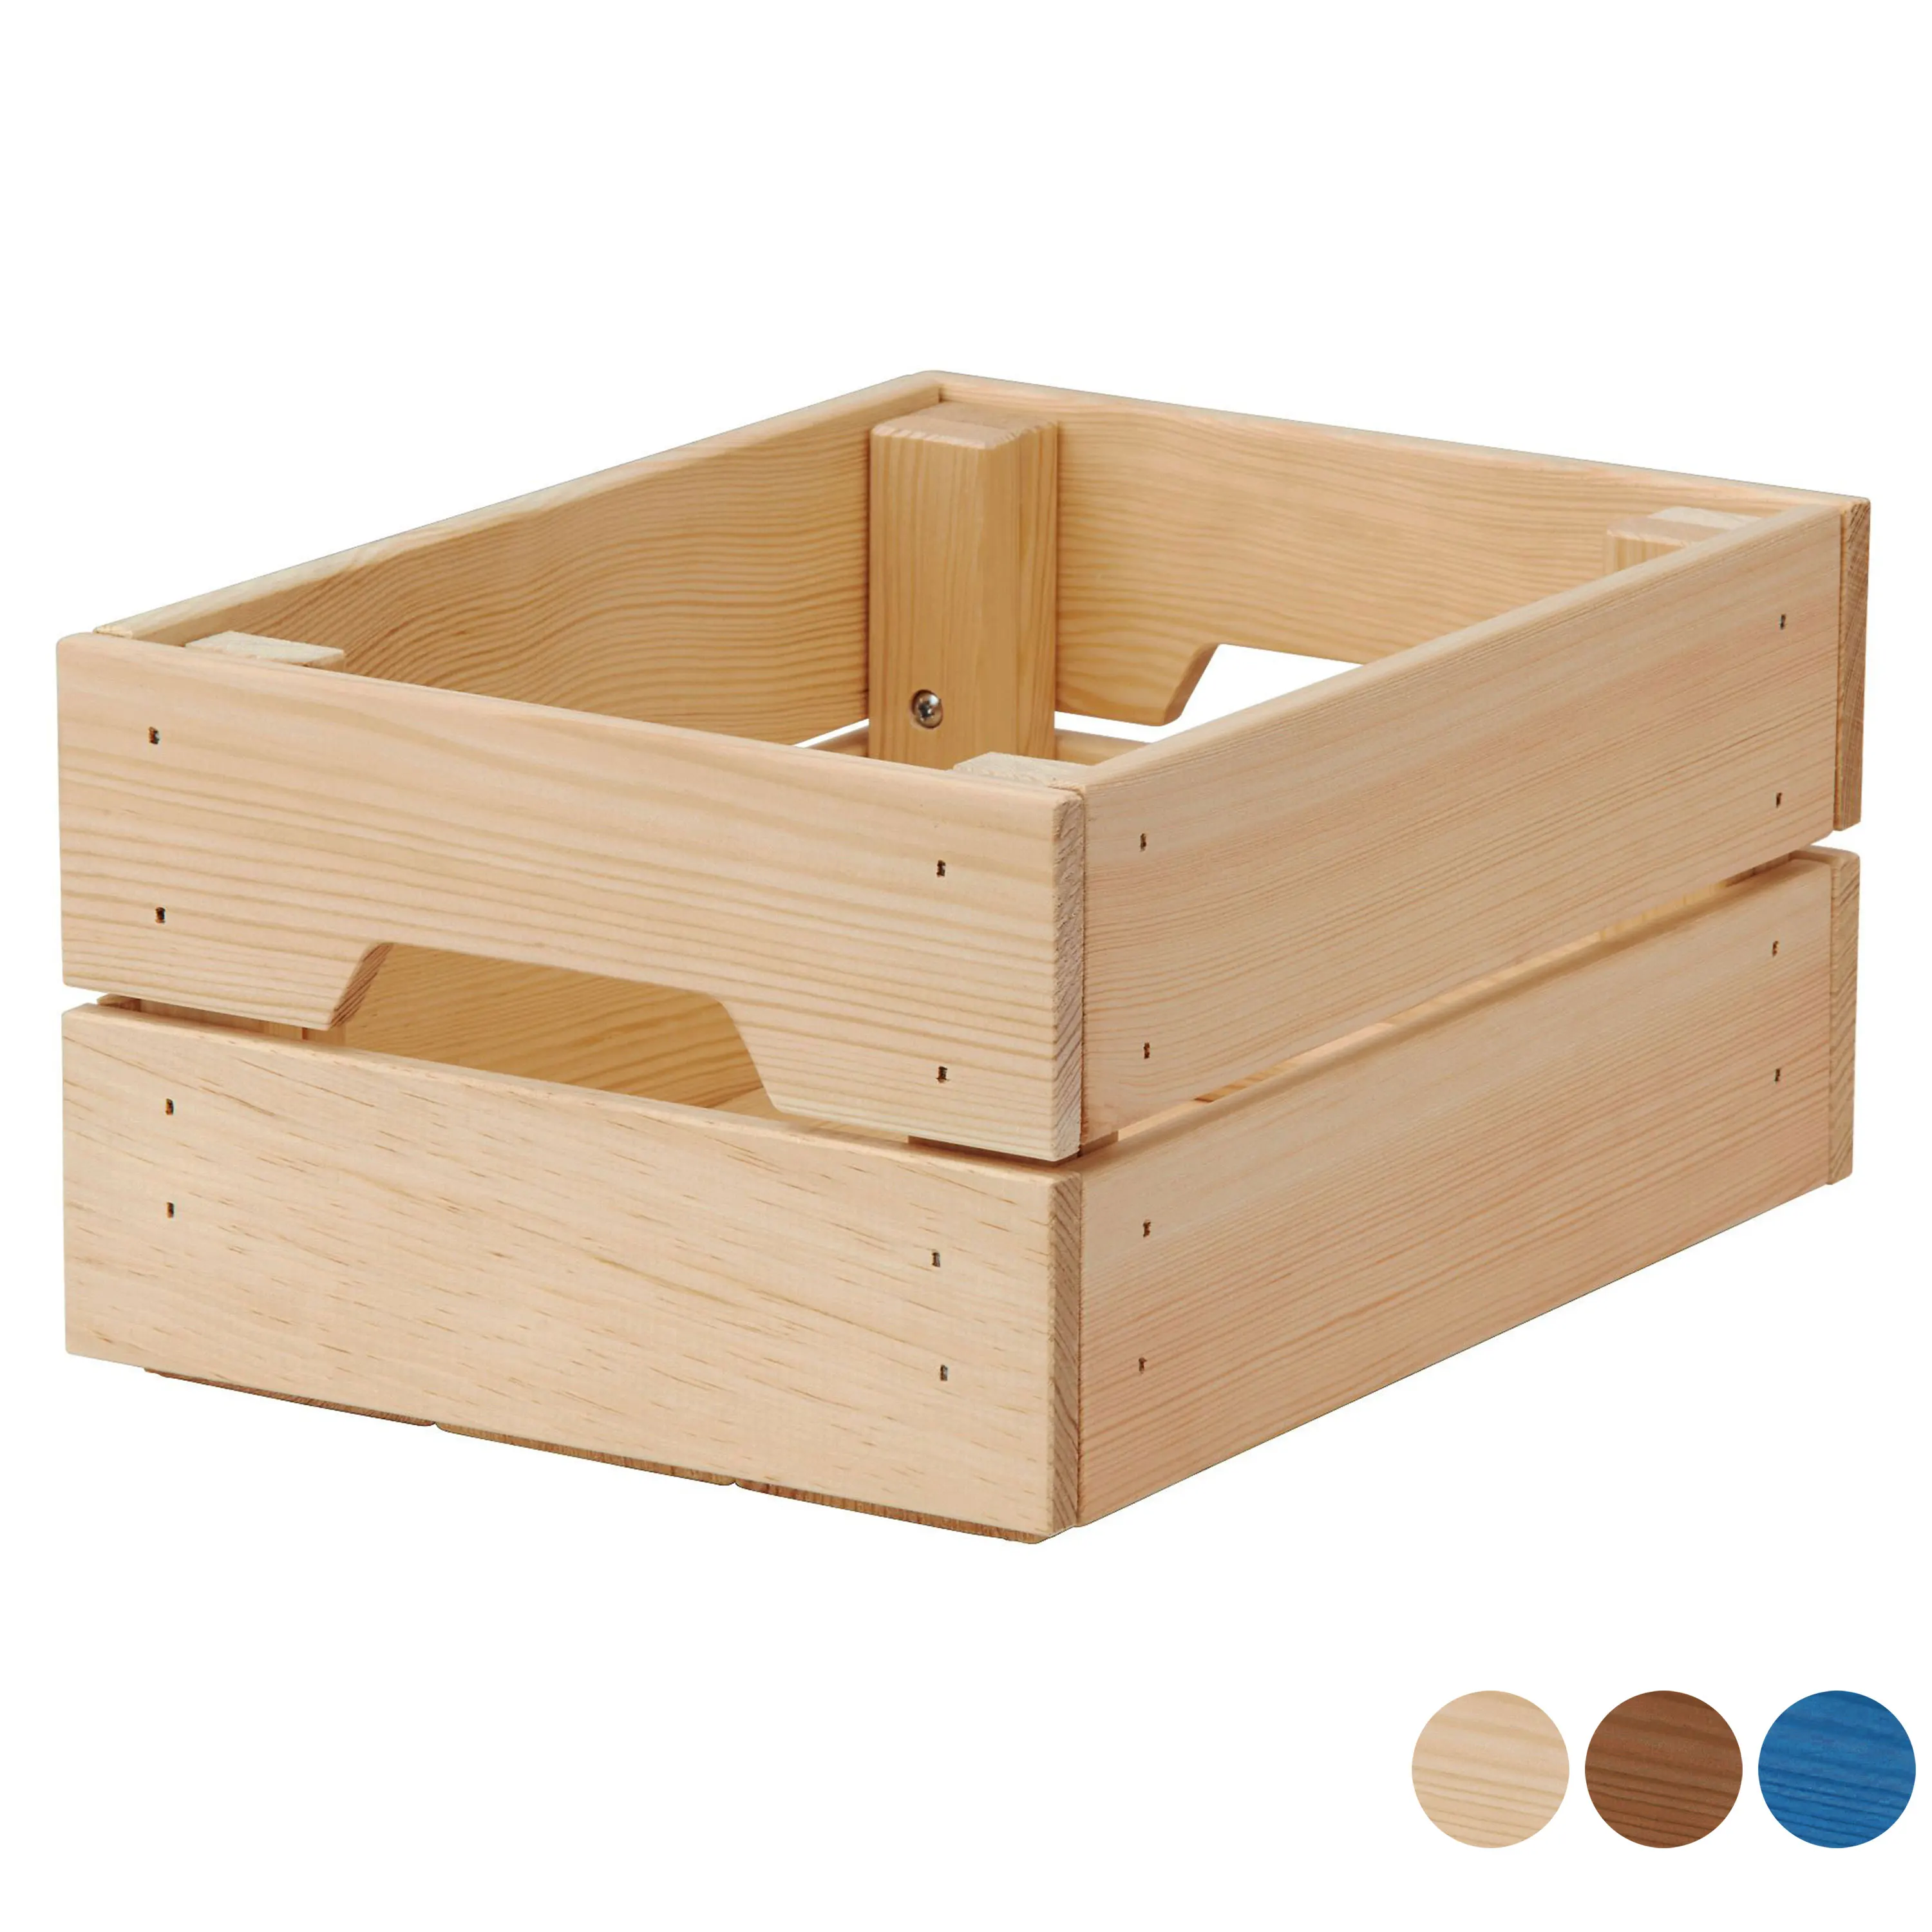 Wooden Storage Box Crate Caddy Kitchen Toy Tray Organiser Vintage PD31-L 